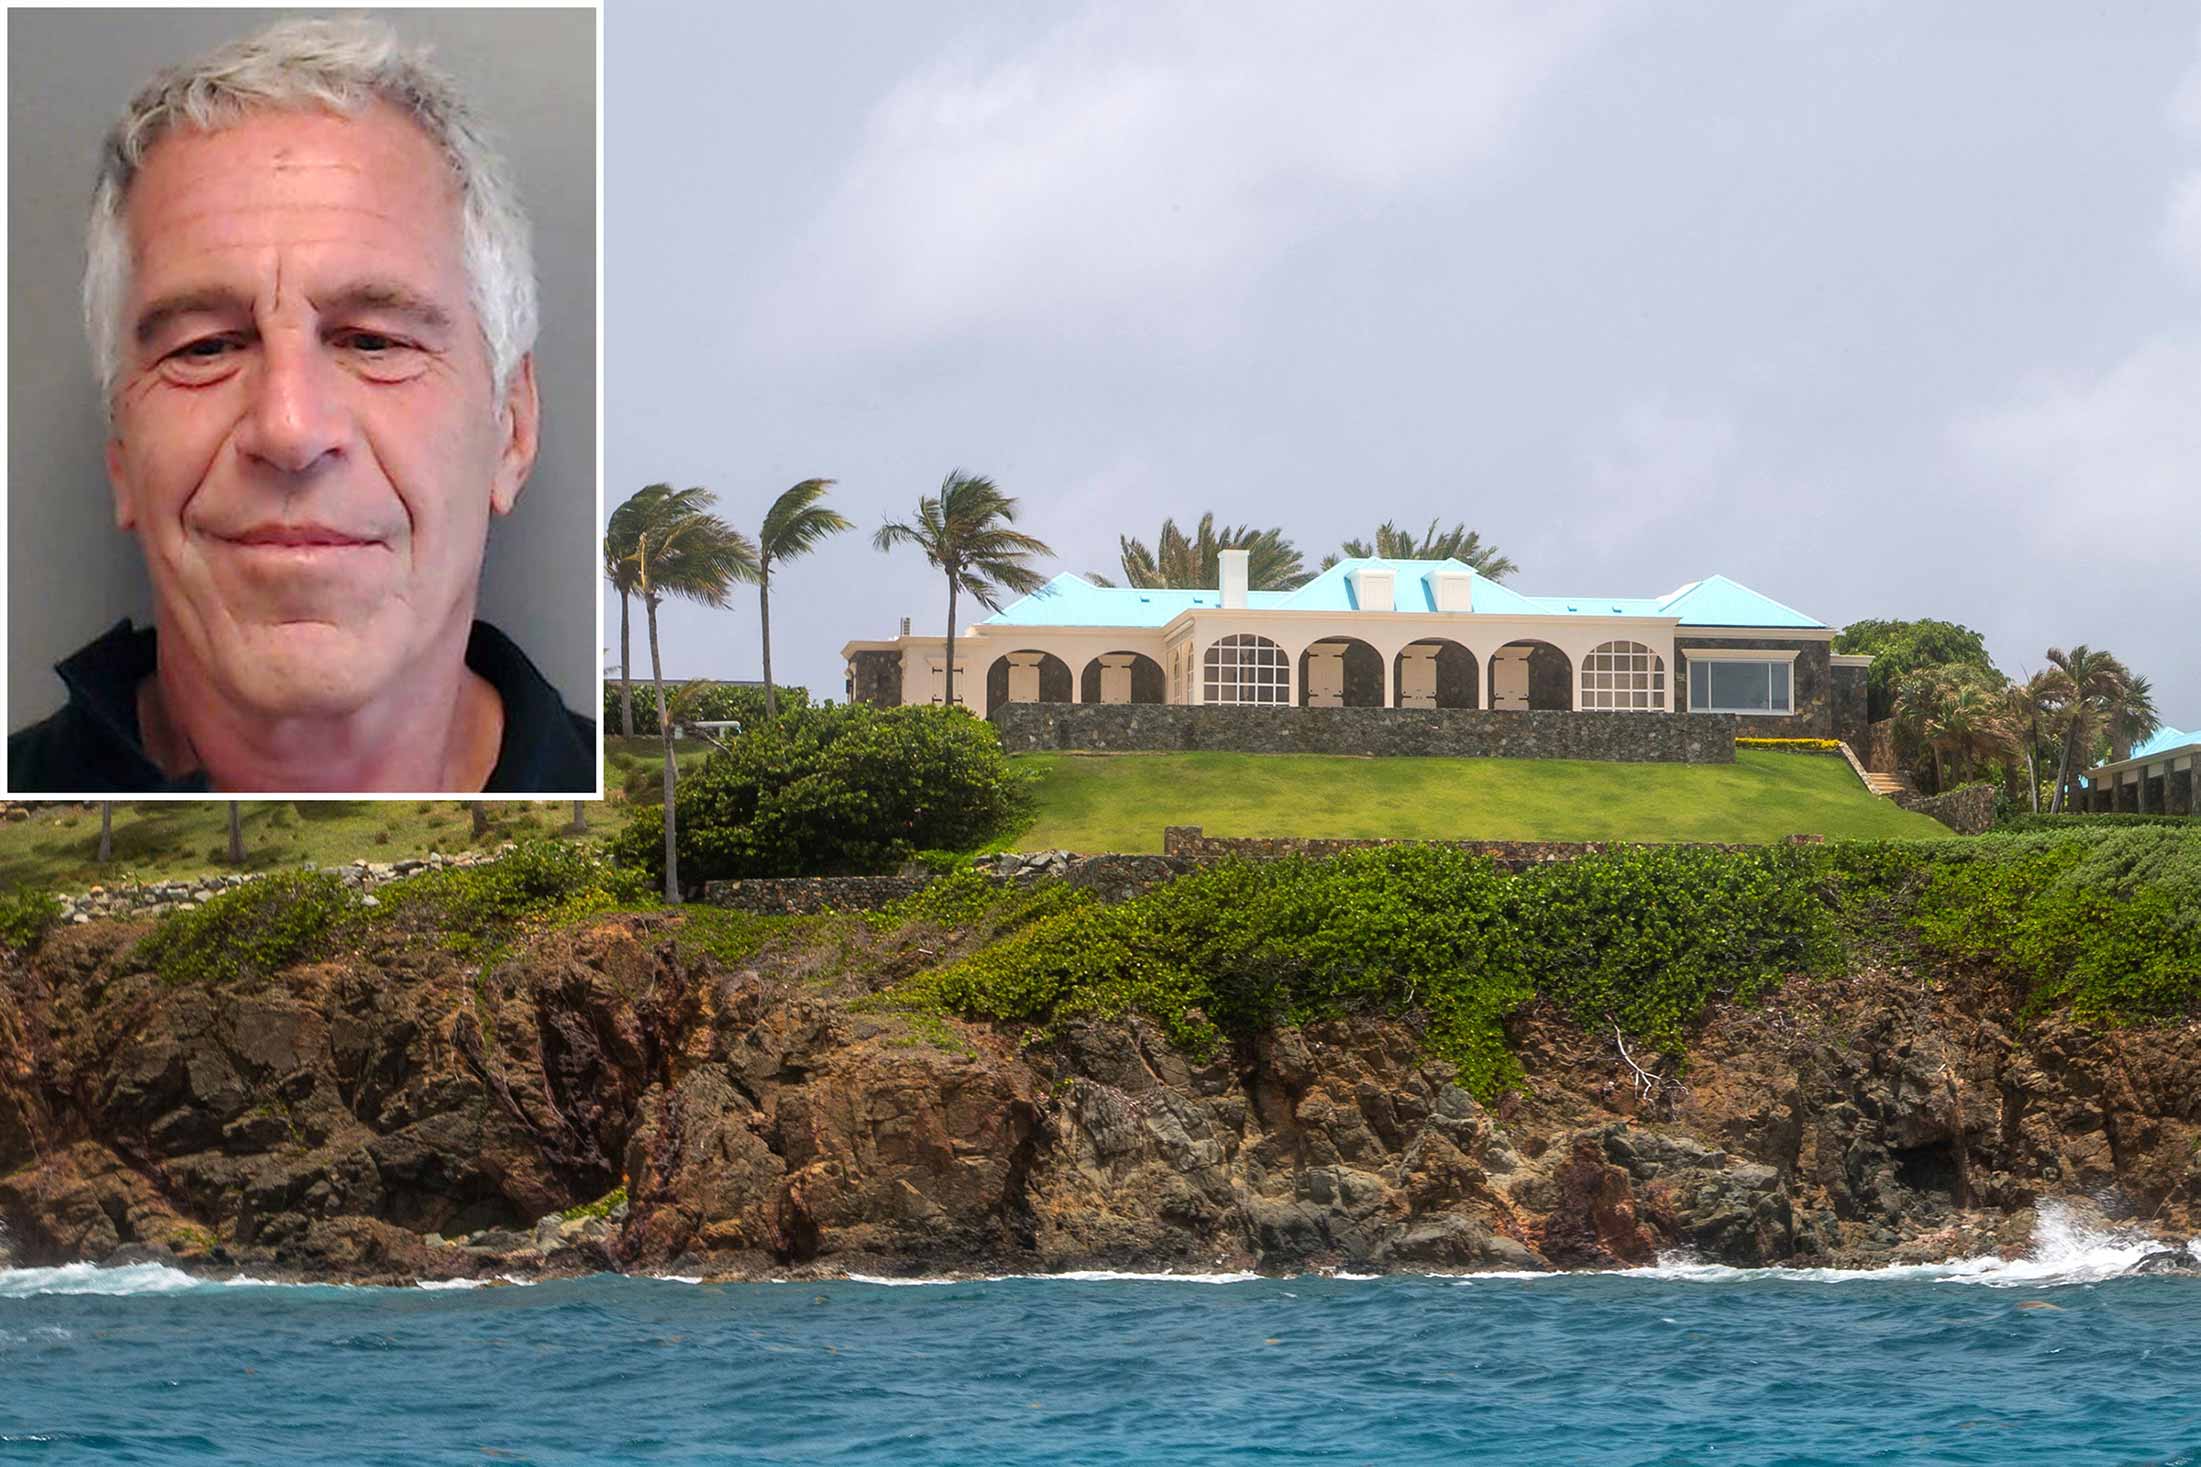 The Craziest Information About Jeffrey Epstein And His Private Island Film Daily